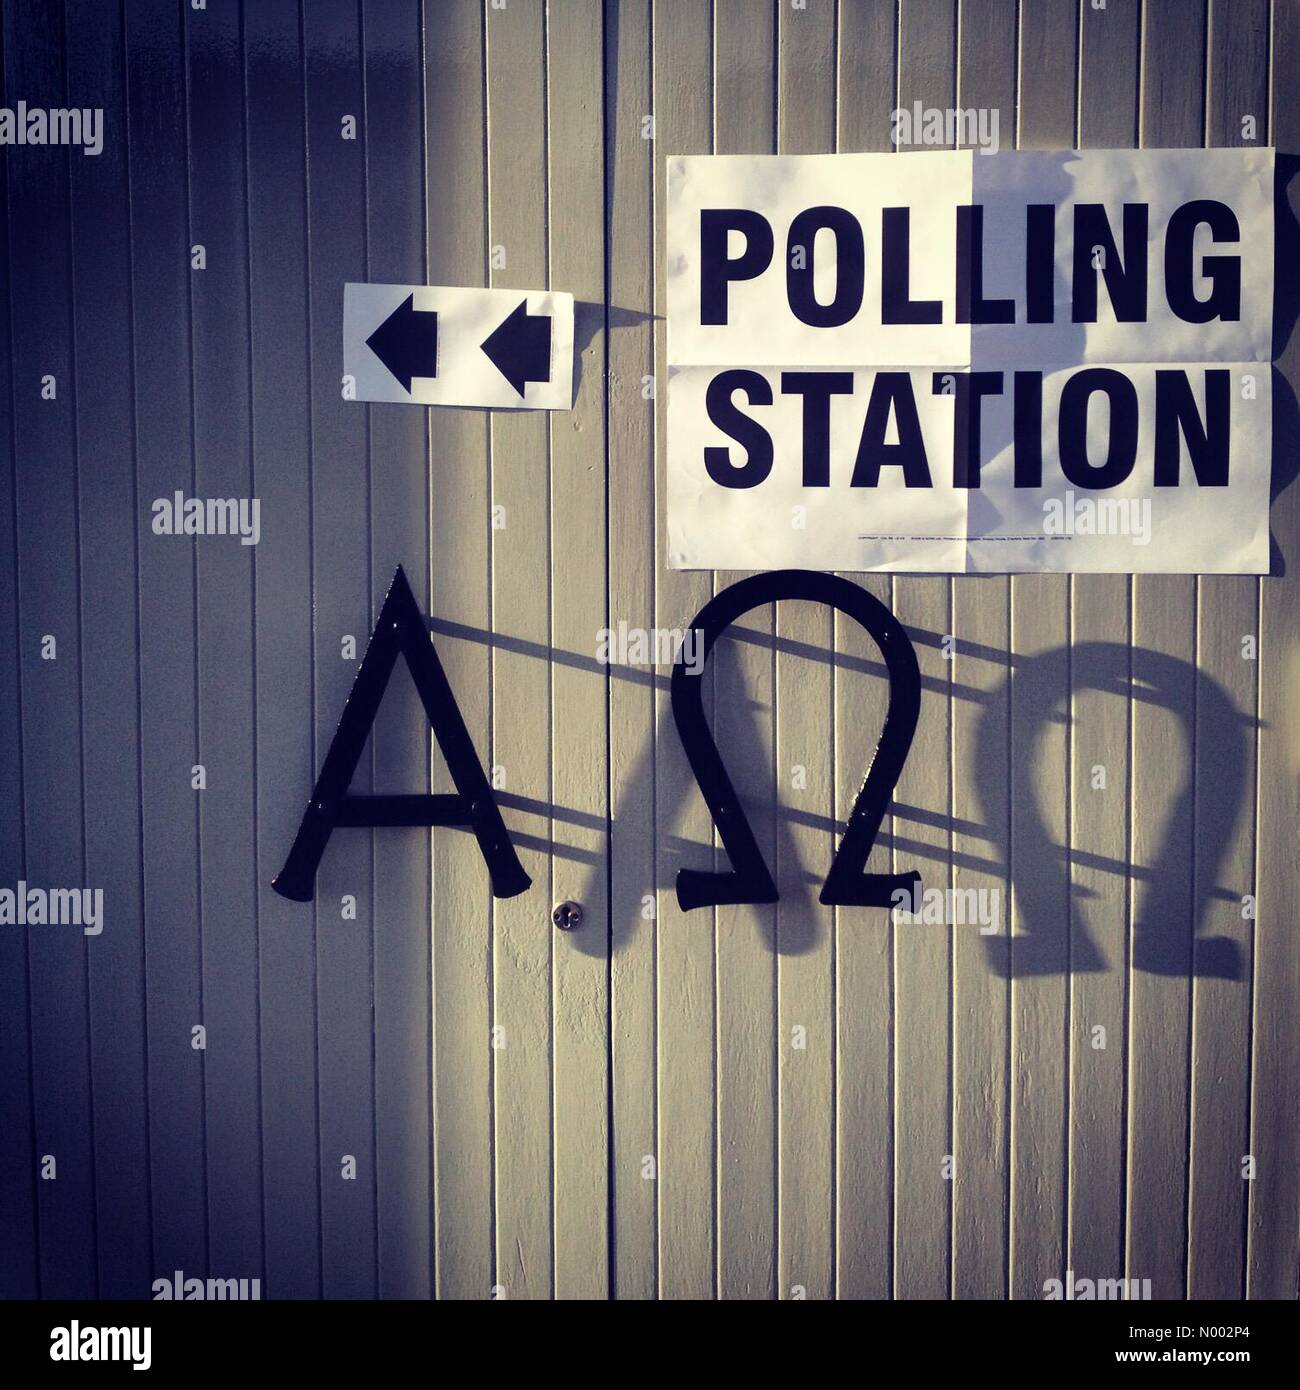 Polling station sign in UK Stock Photo